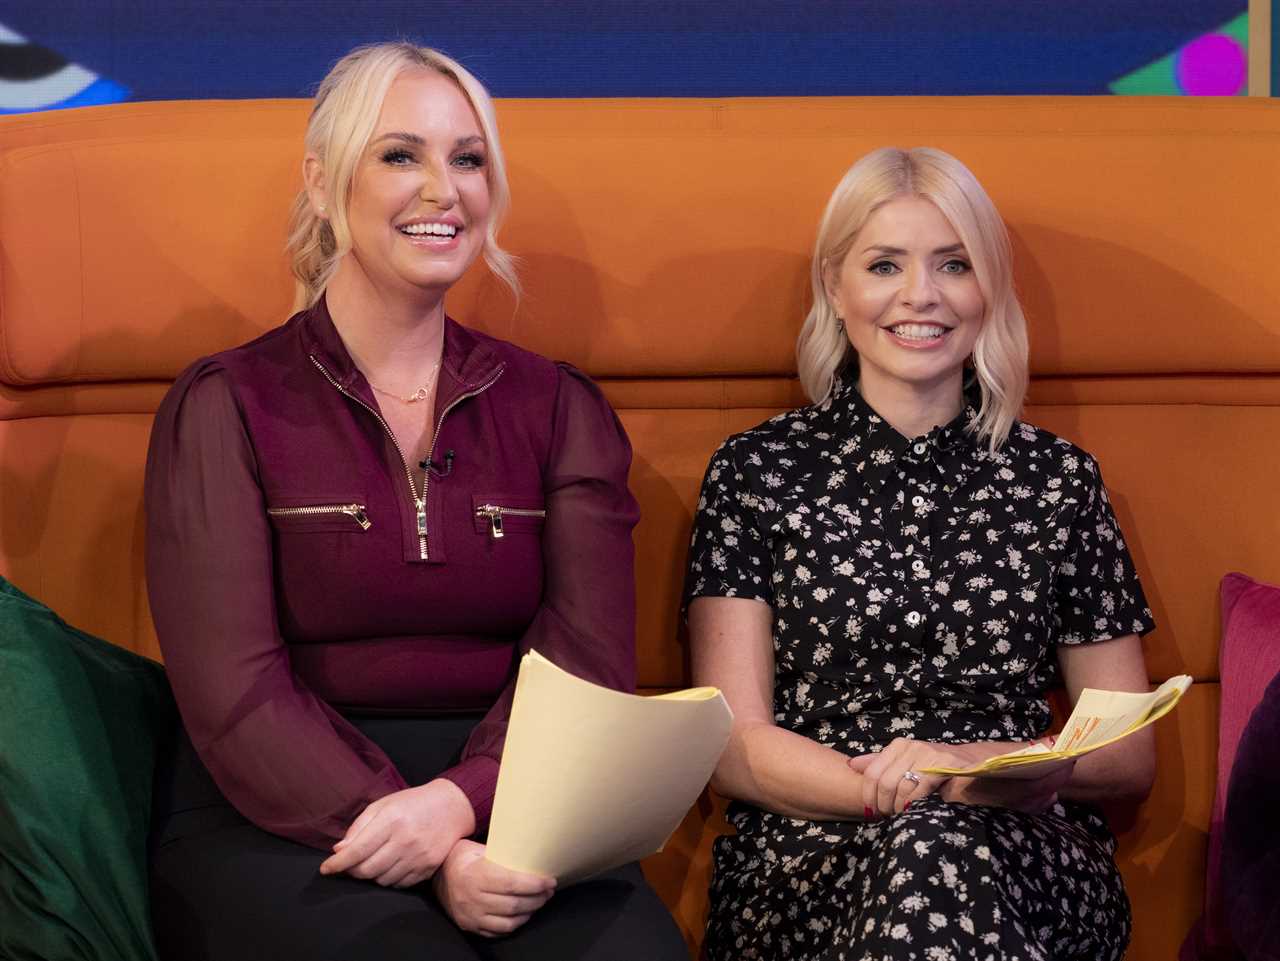 Josie Gibson's Refreshing Decision: Why She Didn't Replace Holly Willoughby on This Morning